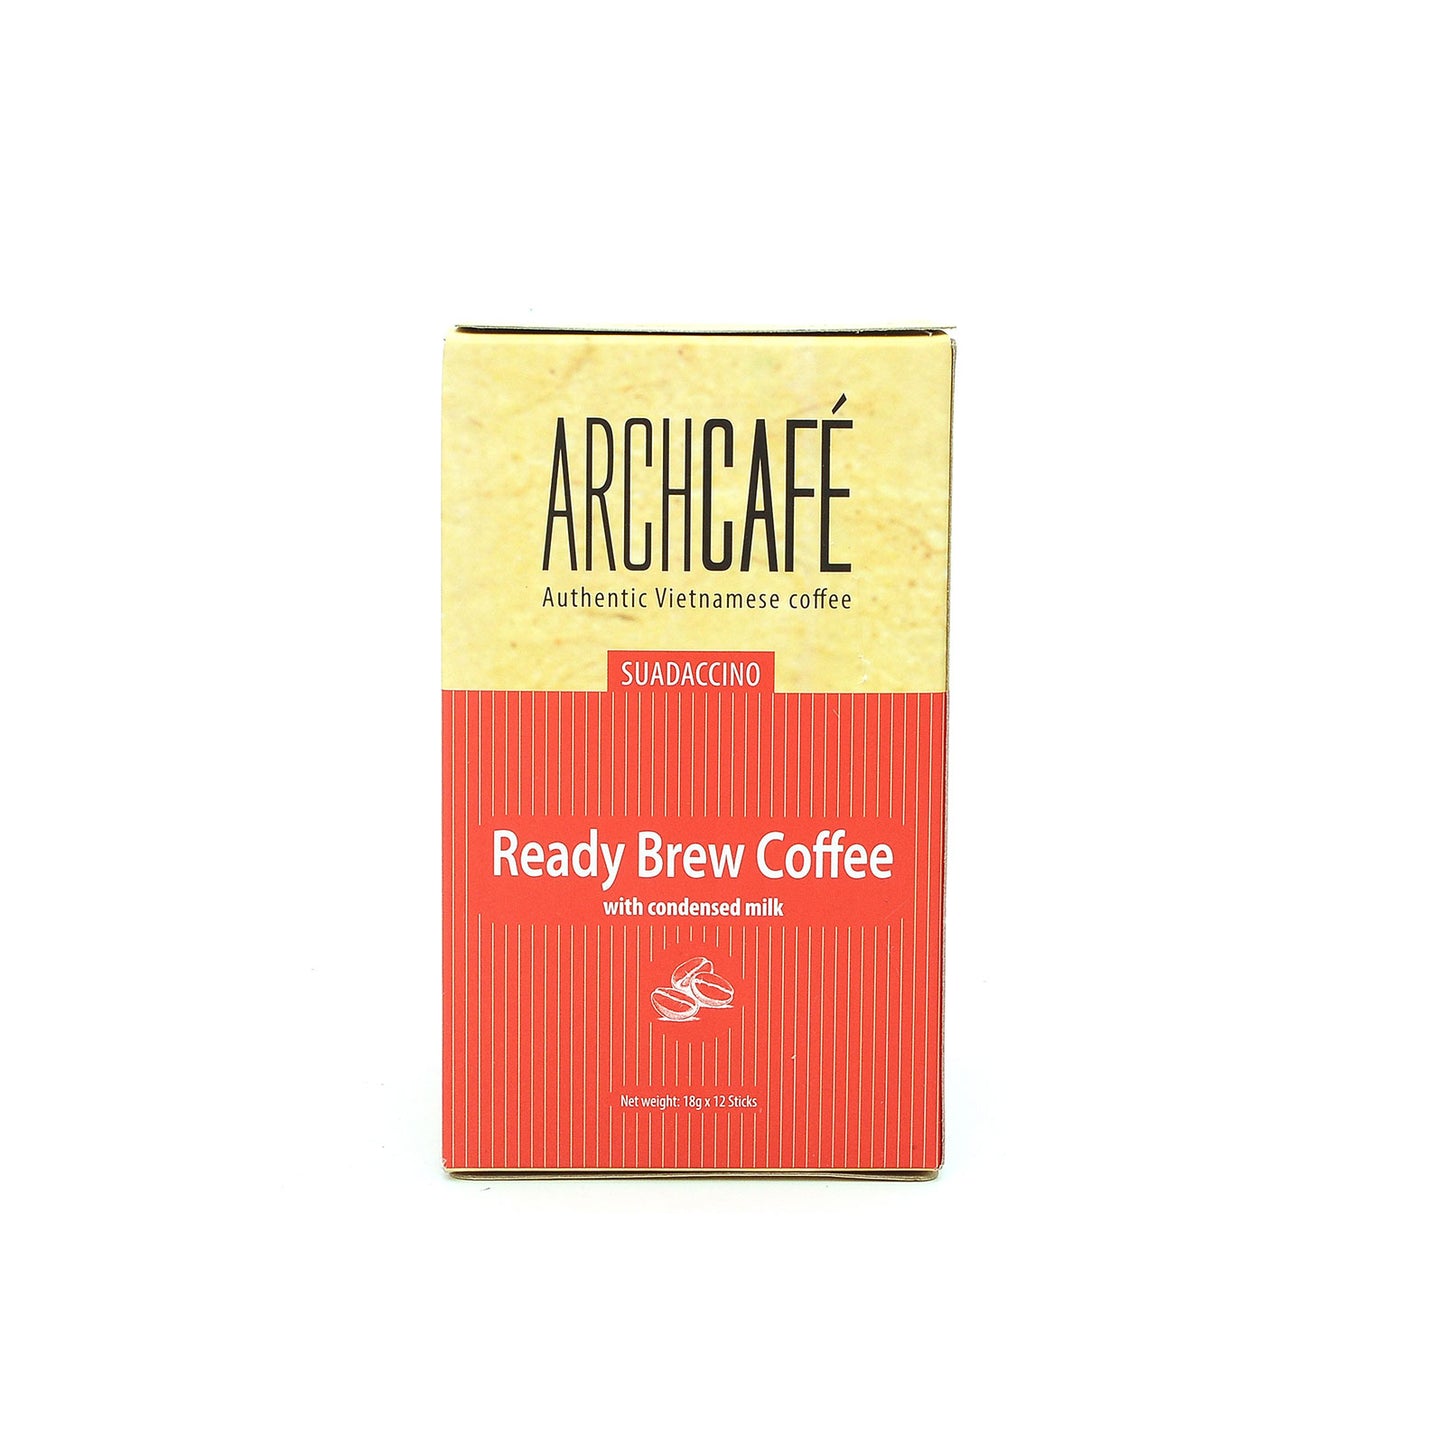 Archcafe Authentic Vietnamese Coffee Instant Coffee Instant Beverages